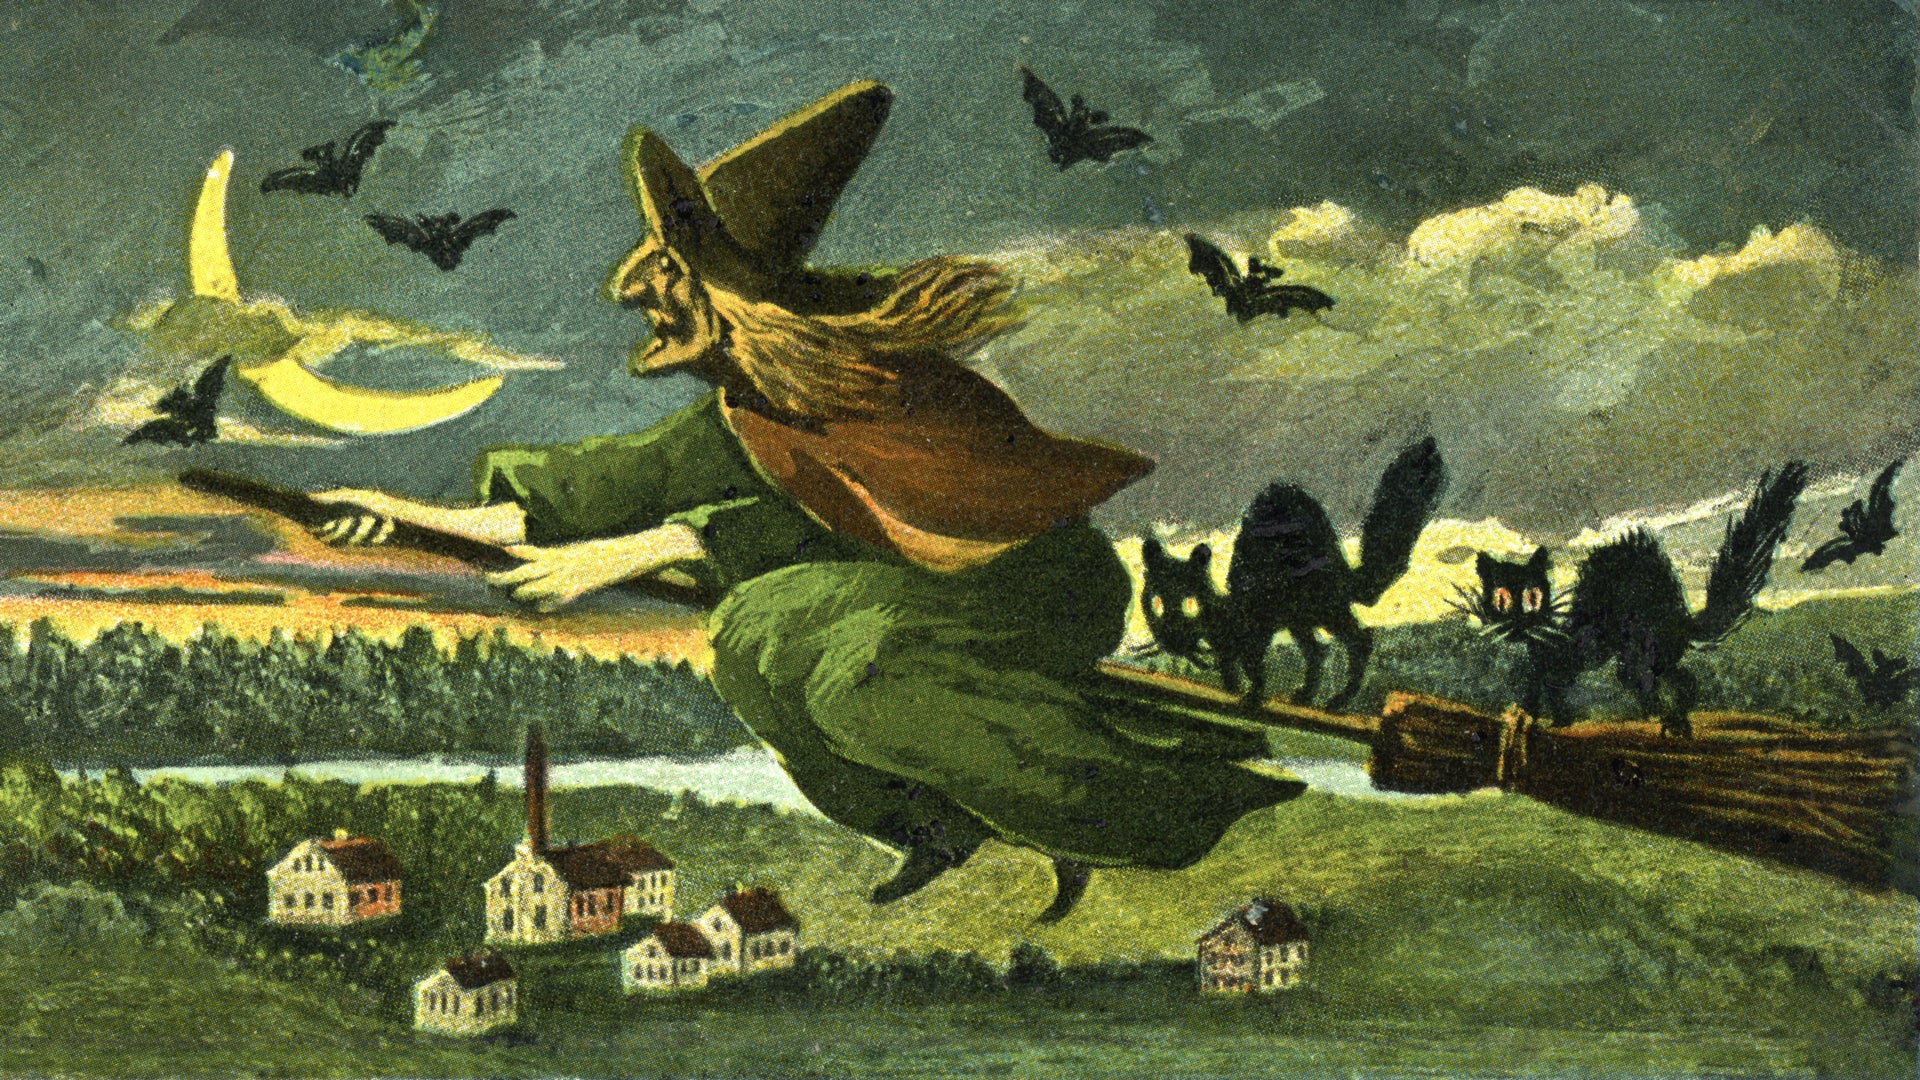 Why Do Witches Ride Brooms? The History Behind the Legend | HISTORY